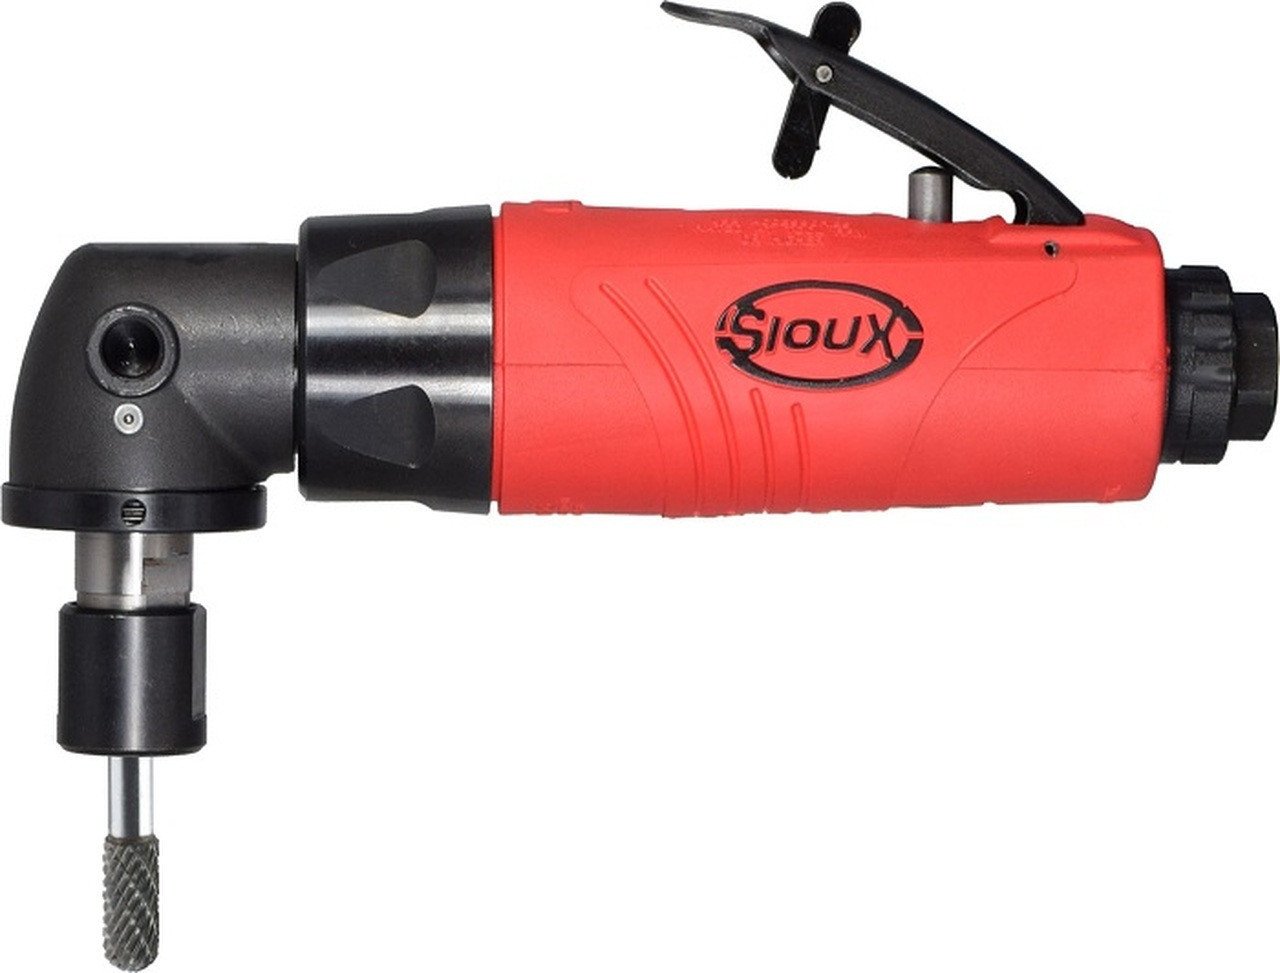 Sioux Tools SAG05S15S Right Angle Die Grinder | 0.5 HP | 15000 RPM | 300 Series Collet | Rear Exhaust